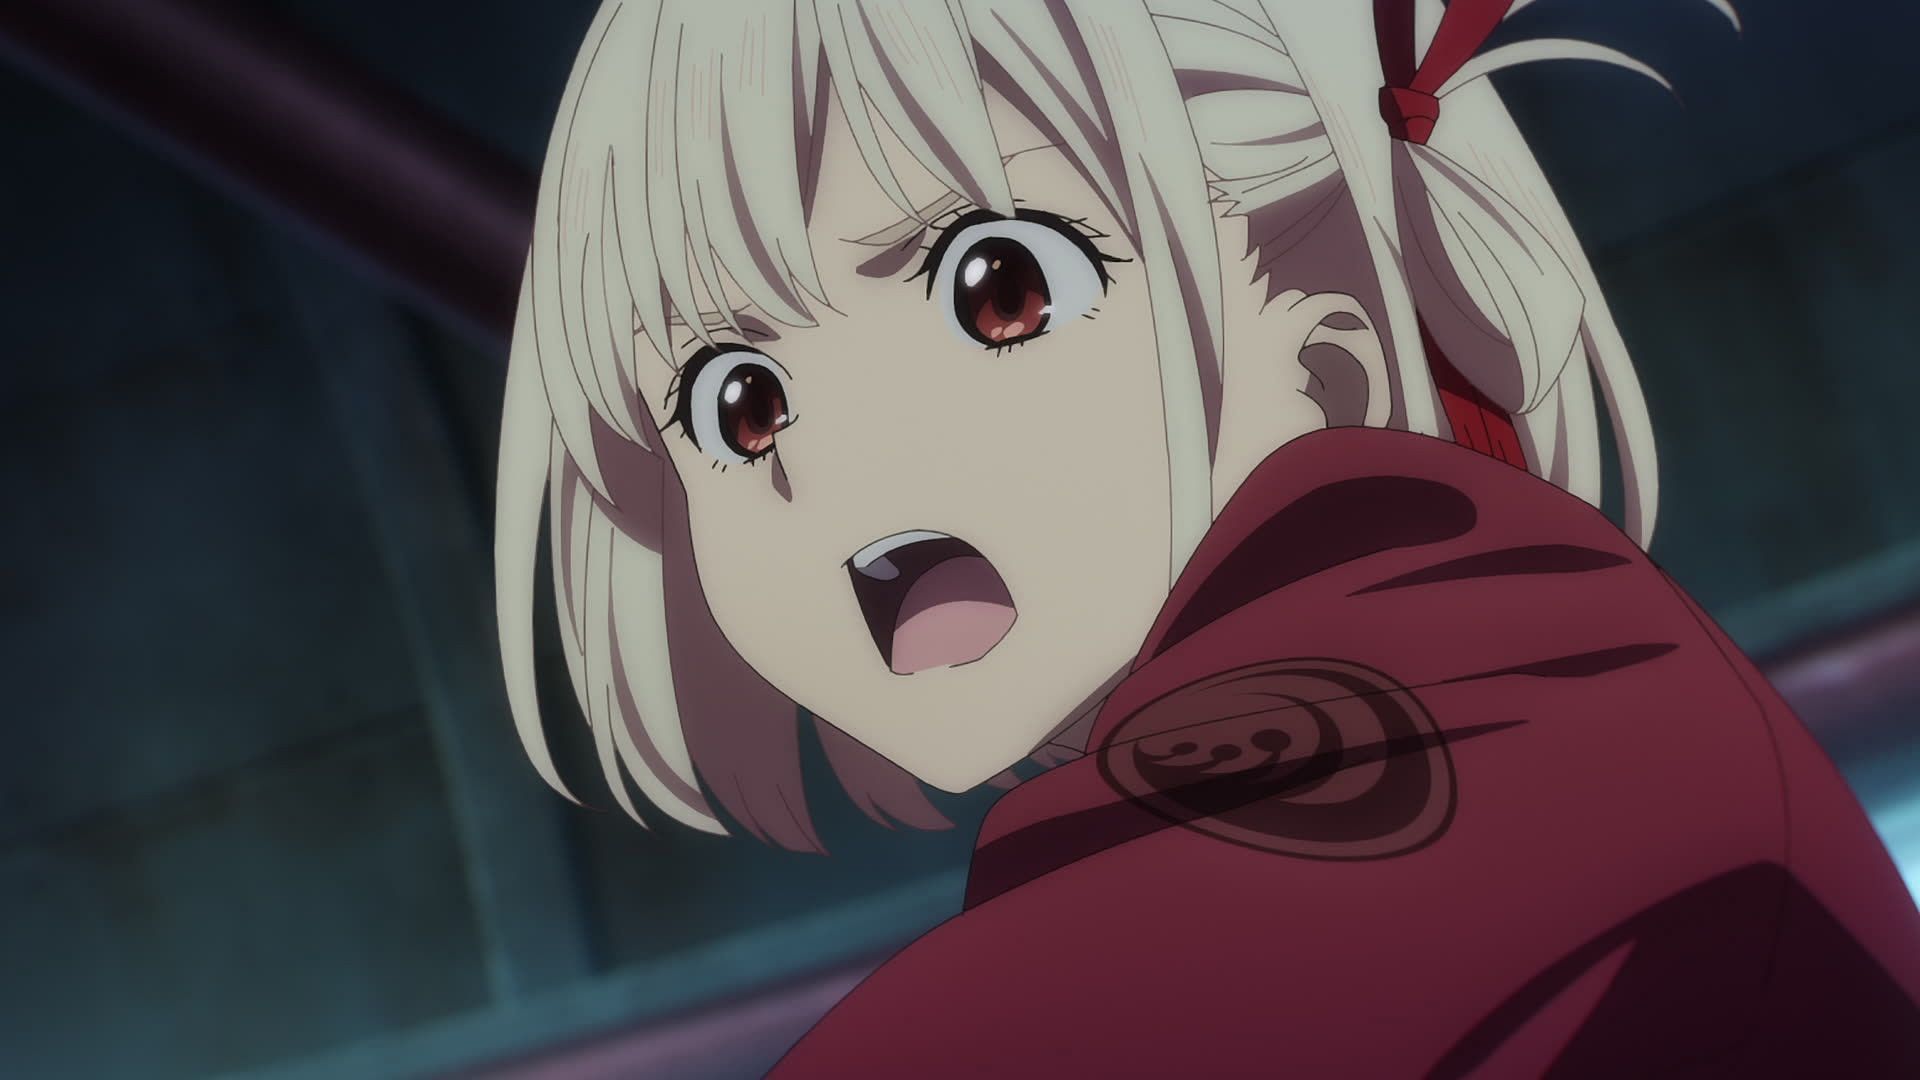 Chisato as seen in the series (Image via A-1 Pictures)